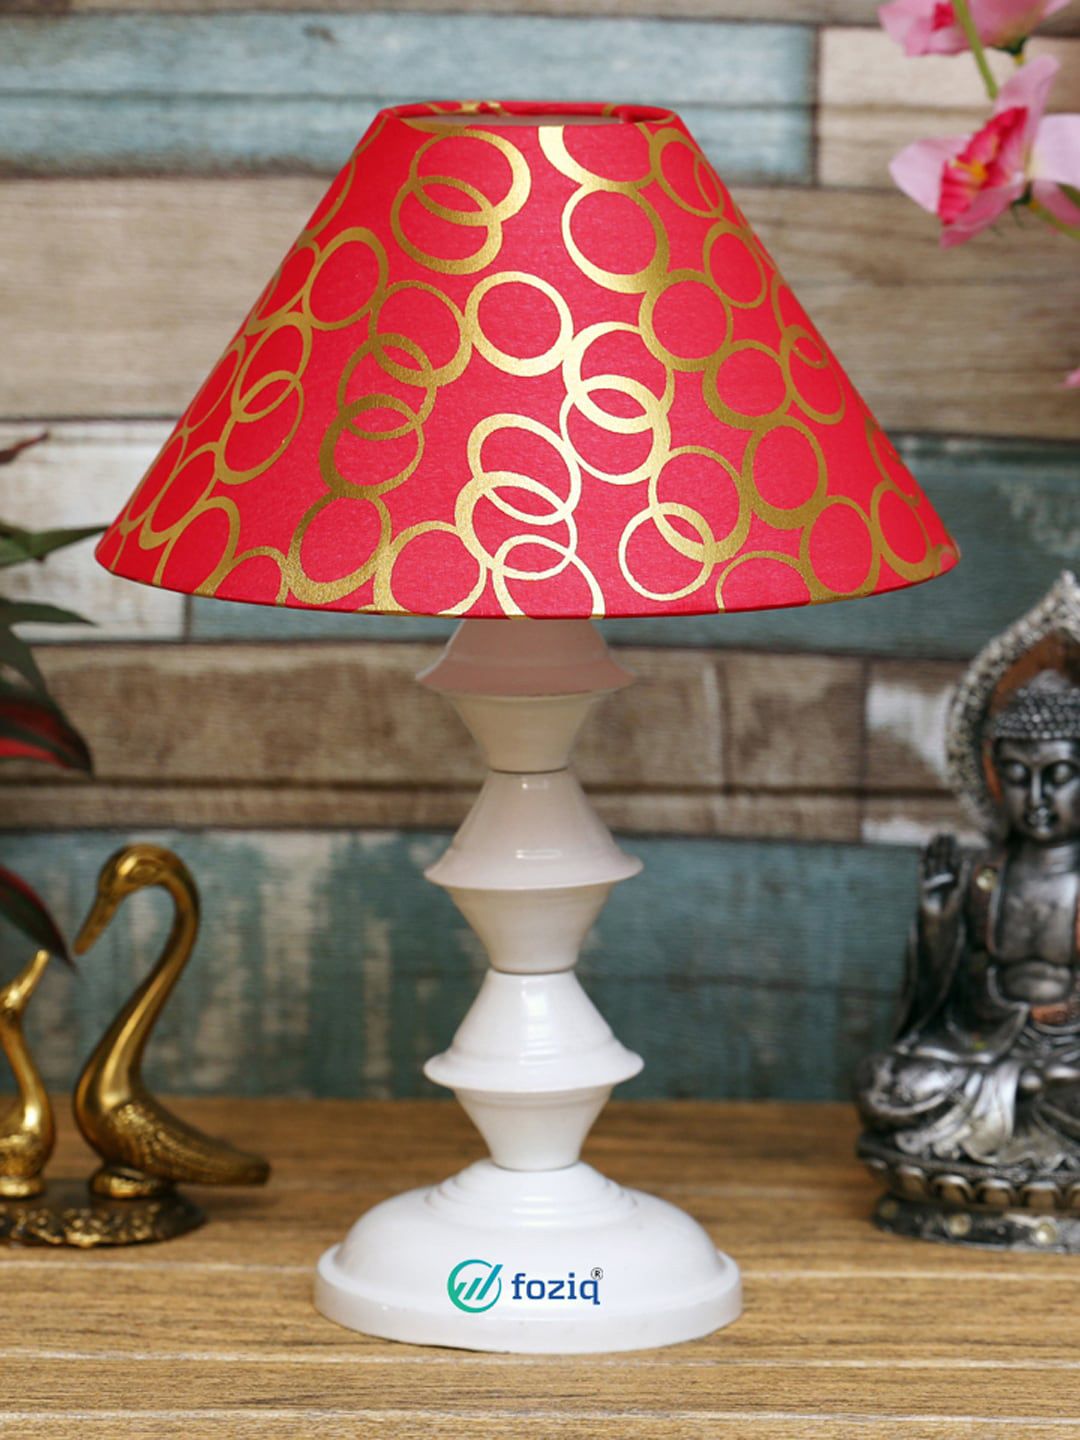 foziq White & Red Printed Table Lamps Price in India